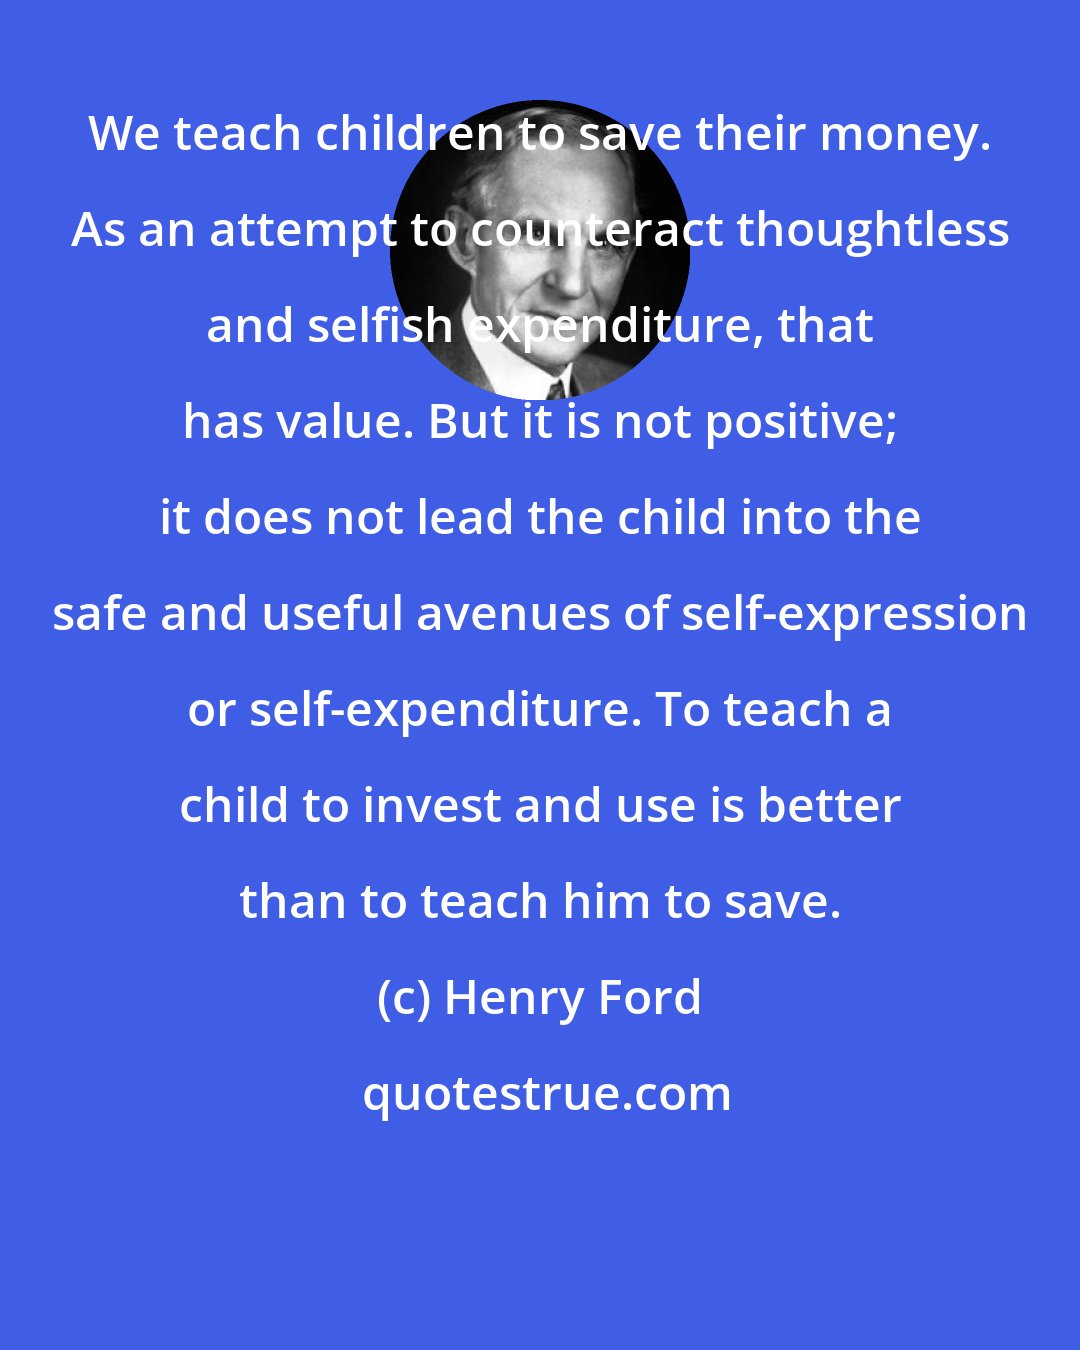 Henry Ford: We teach children to save their money. As an attempt to counteract thoughtless and selfish expenditure, that has value. But it is not positive; it does not lead the child into the safe and useful avenues of self-expression or self-expenditure. To teach a child to invest and use is better than to teach him to save.